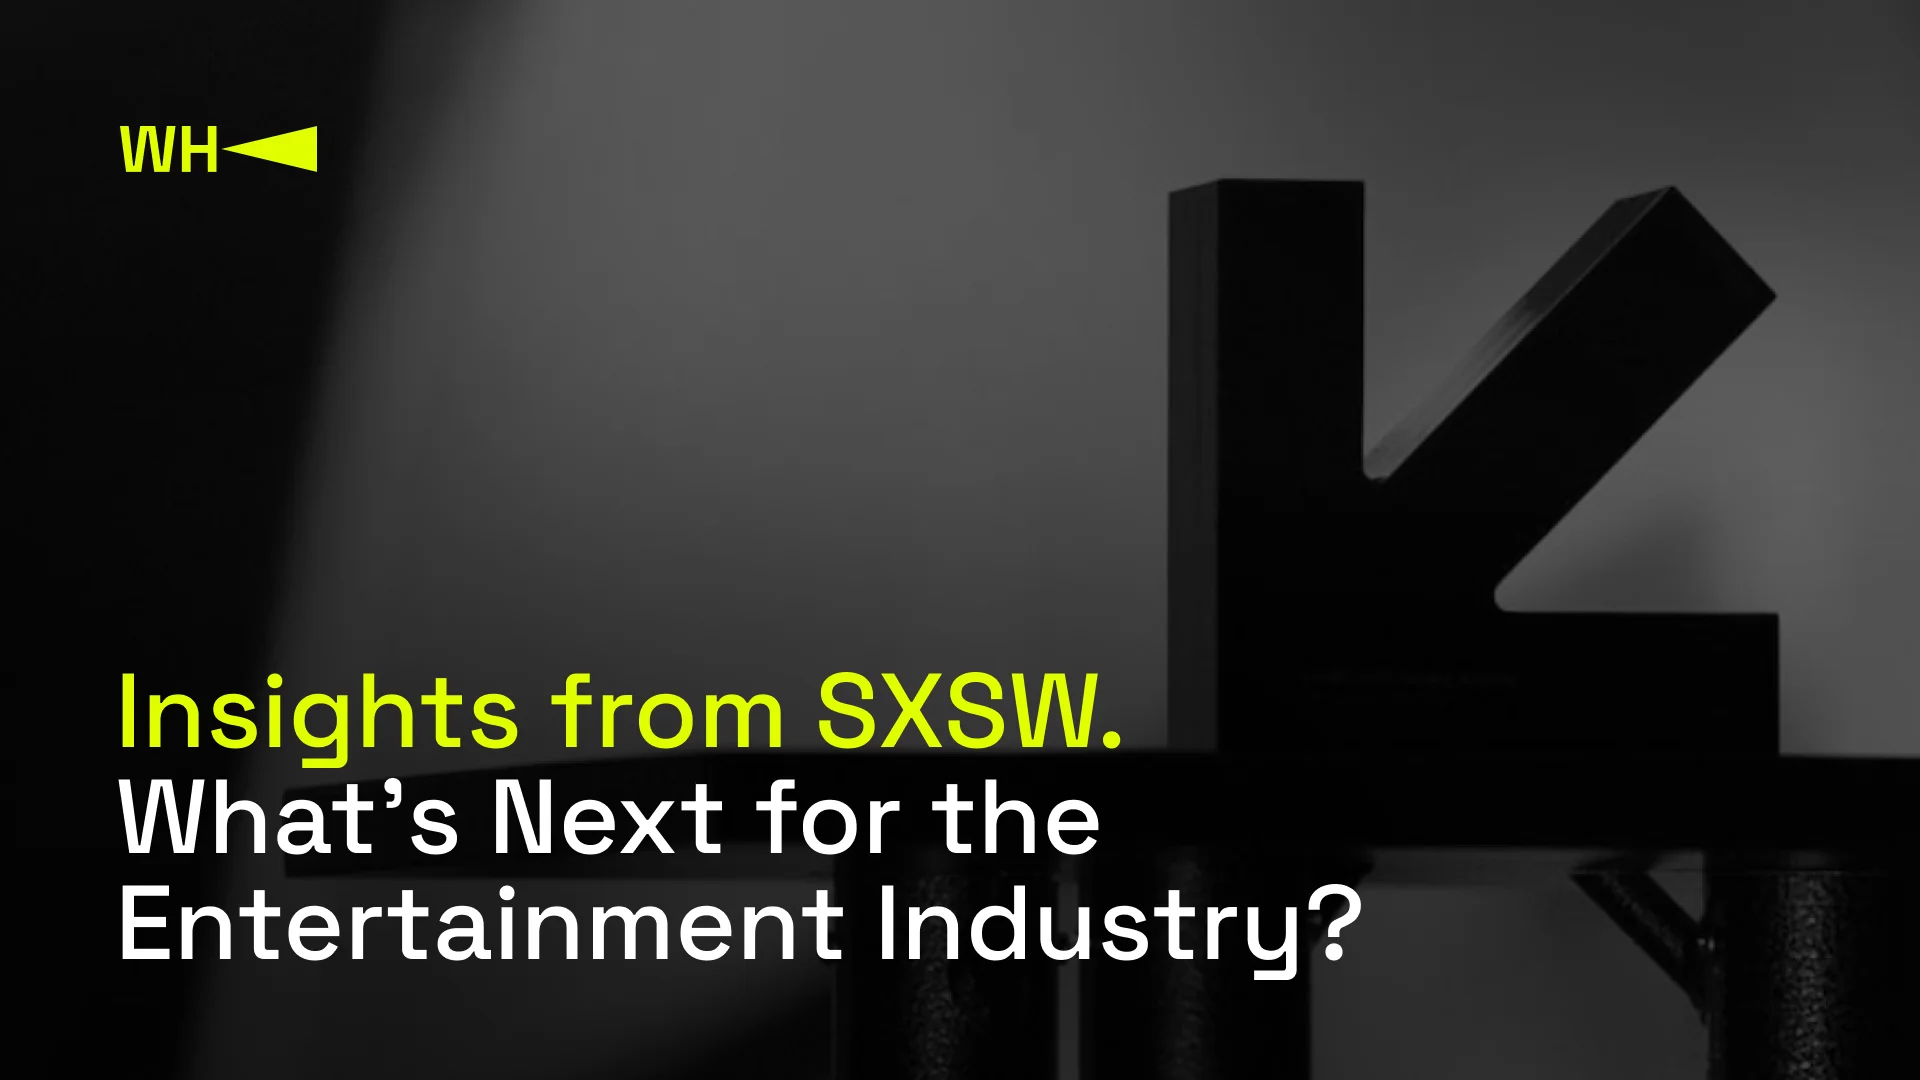 Insights from SXSW. What’s Next for the Entertainment Industry?